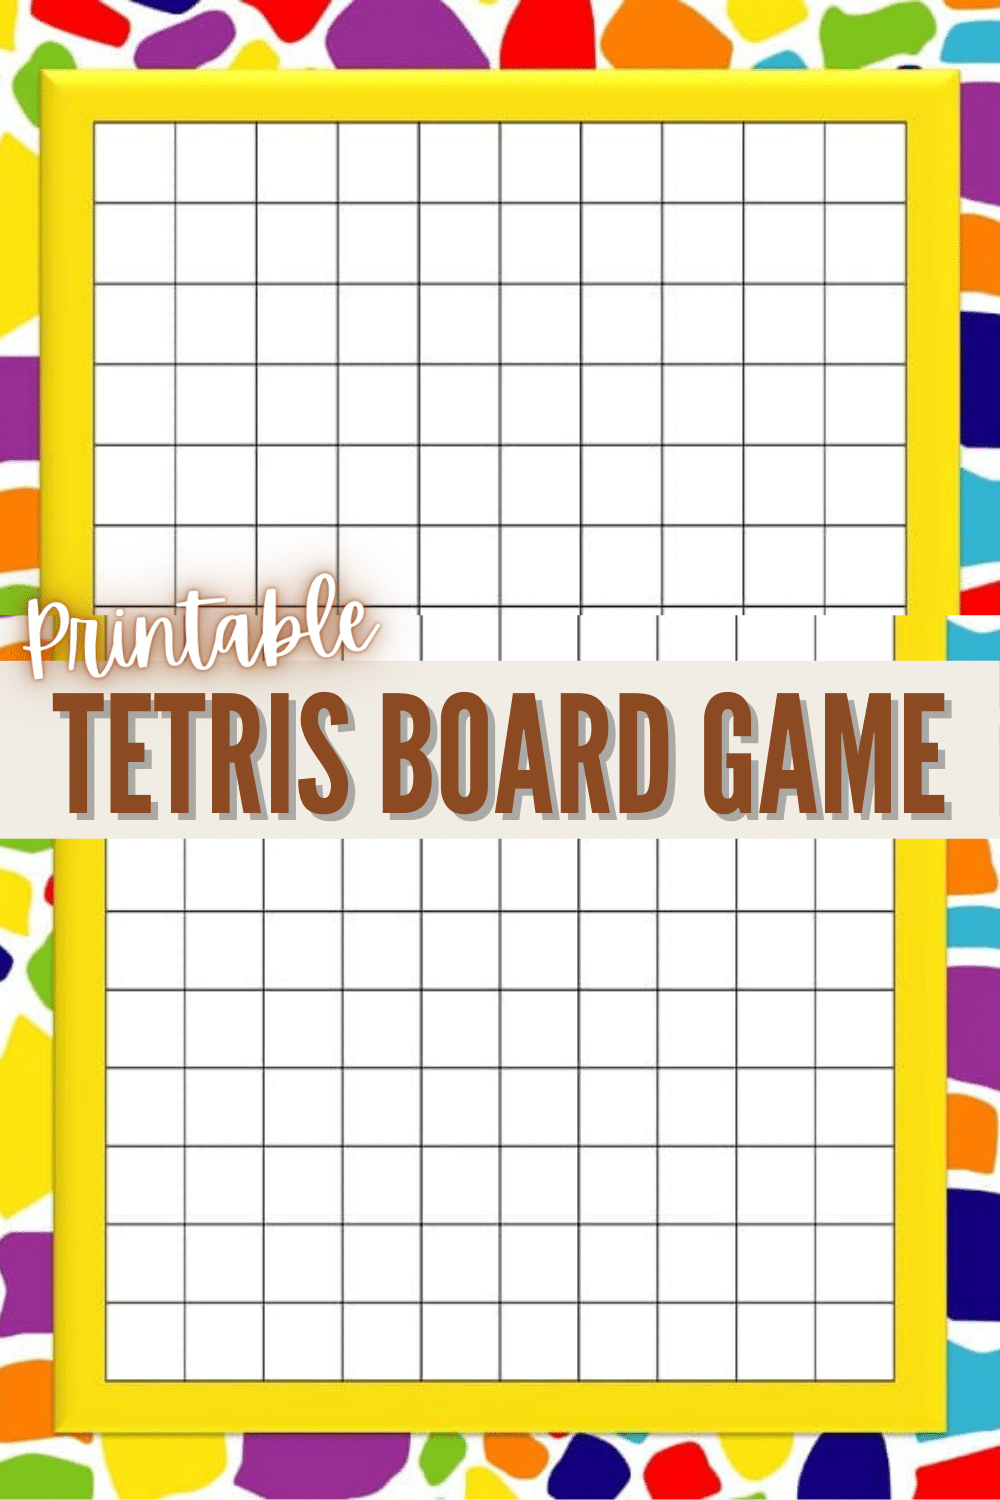 This printable Tetris board game is a great screen-free activity for kids or adults. The kit includes instructions, the board and 2 scoring versions. #printables #printablegames #freeprintables via @wondermomwannab